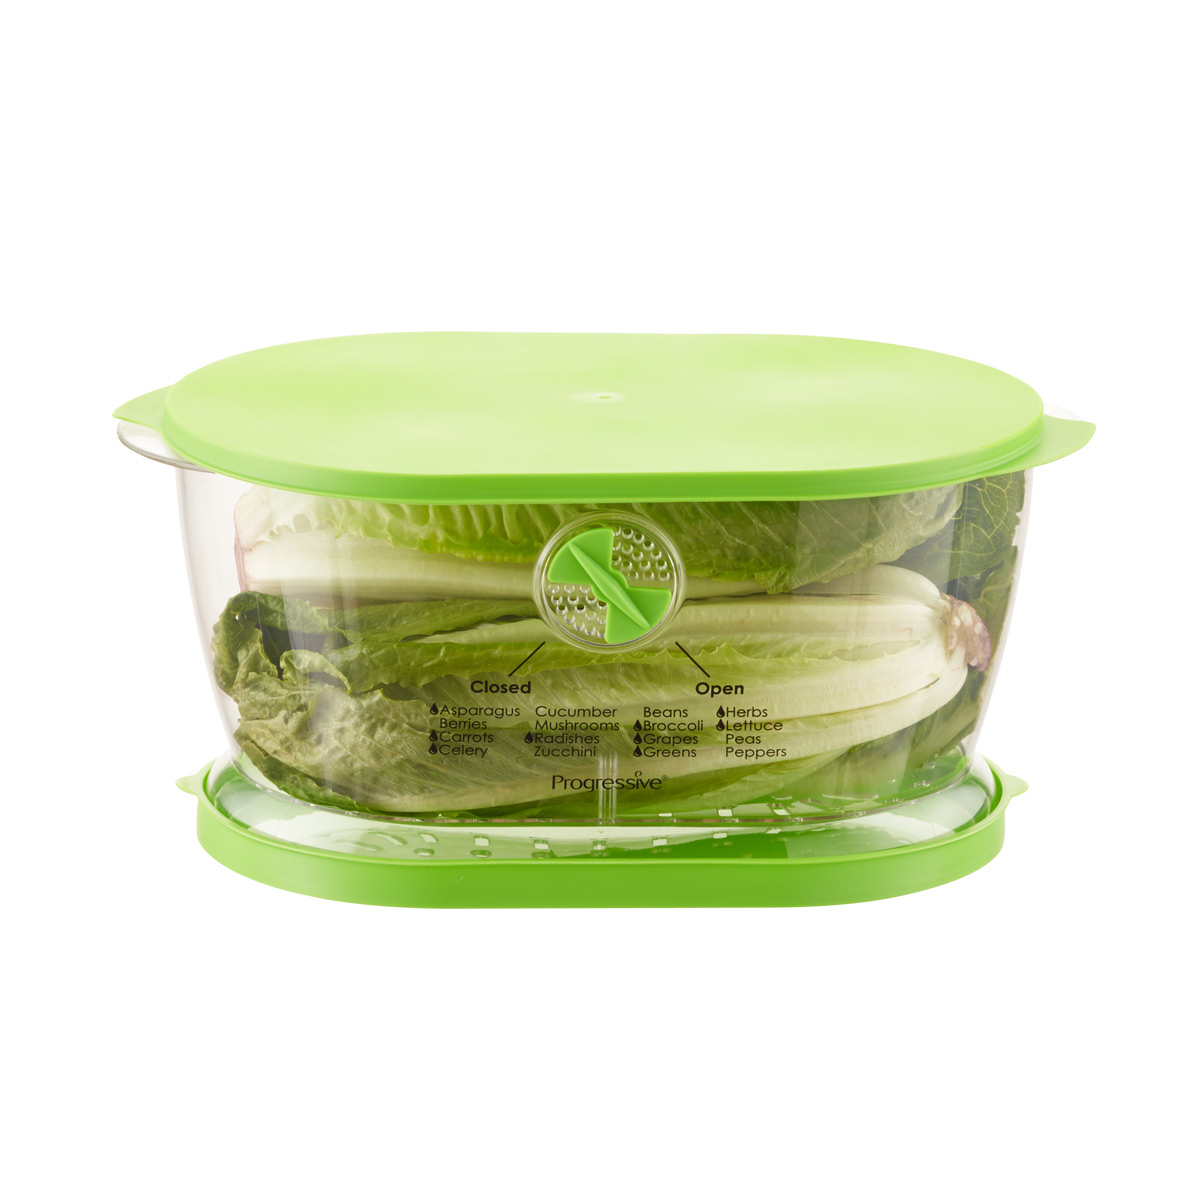 Lettuce Keeper For Fridge Crisper Vegetable Saver With Cover Storage  Container L